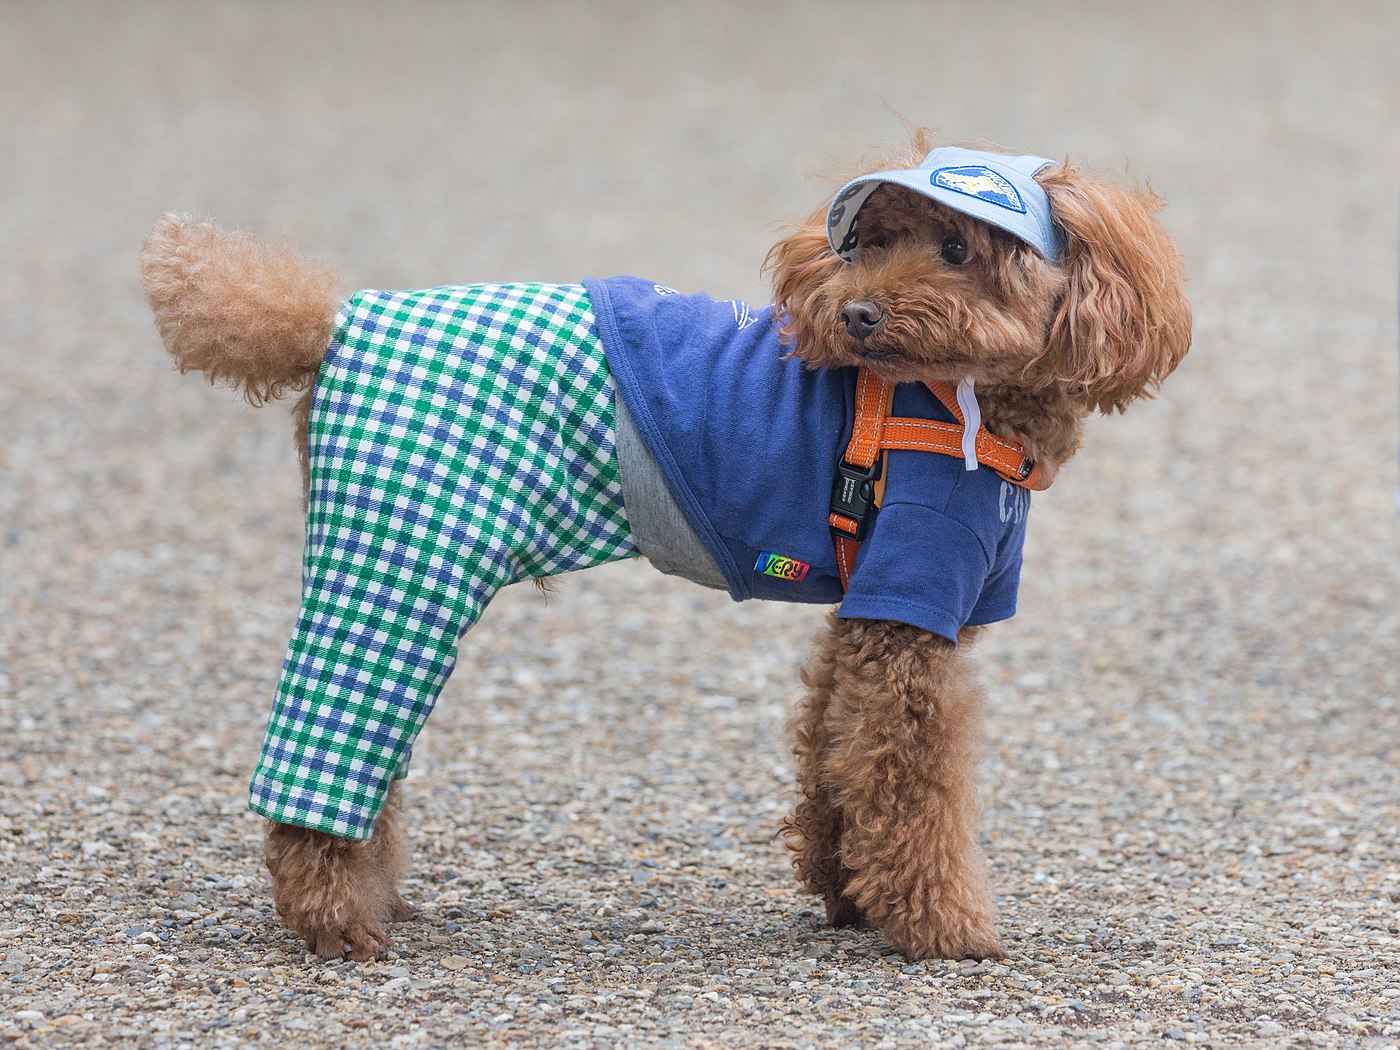 Toy Poodle wearing clothes in Ueno Park, Tokyo, Japan